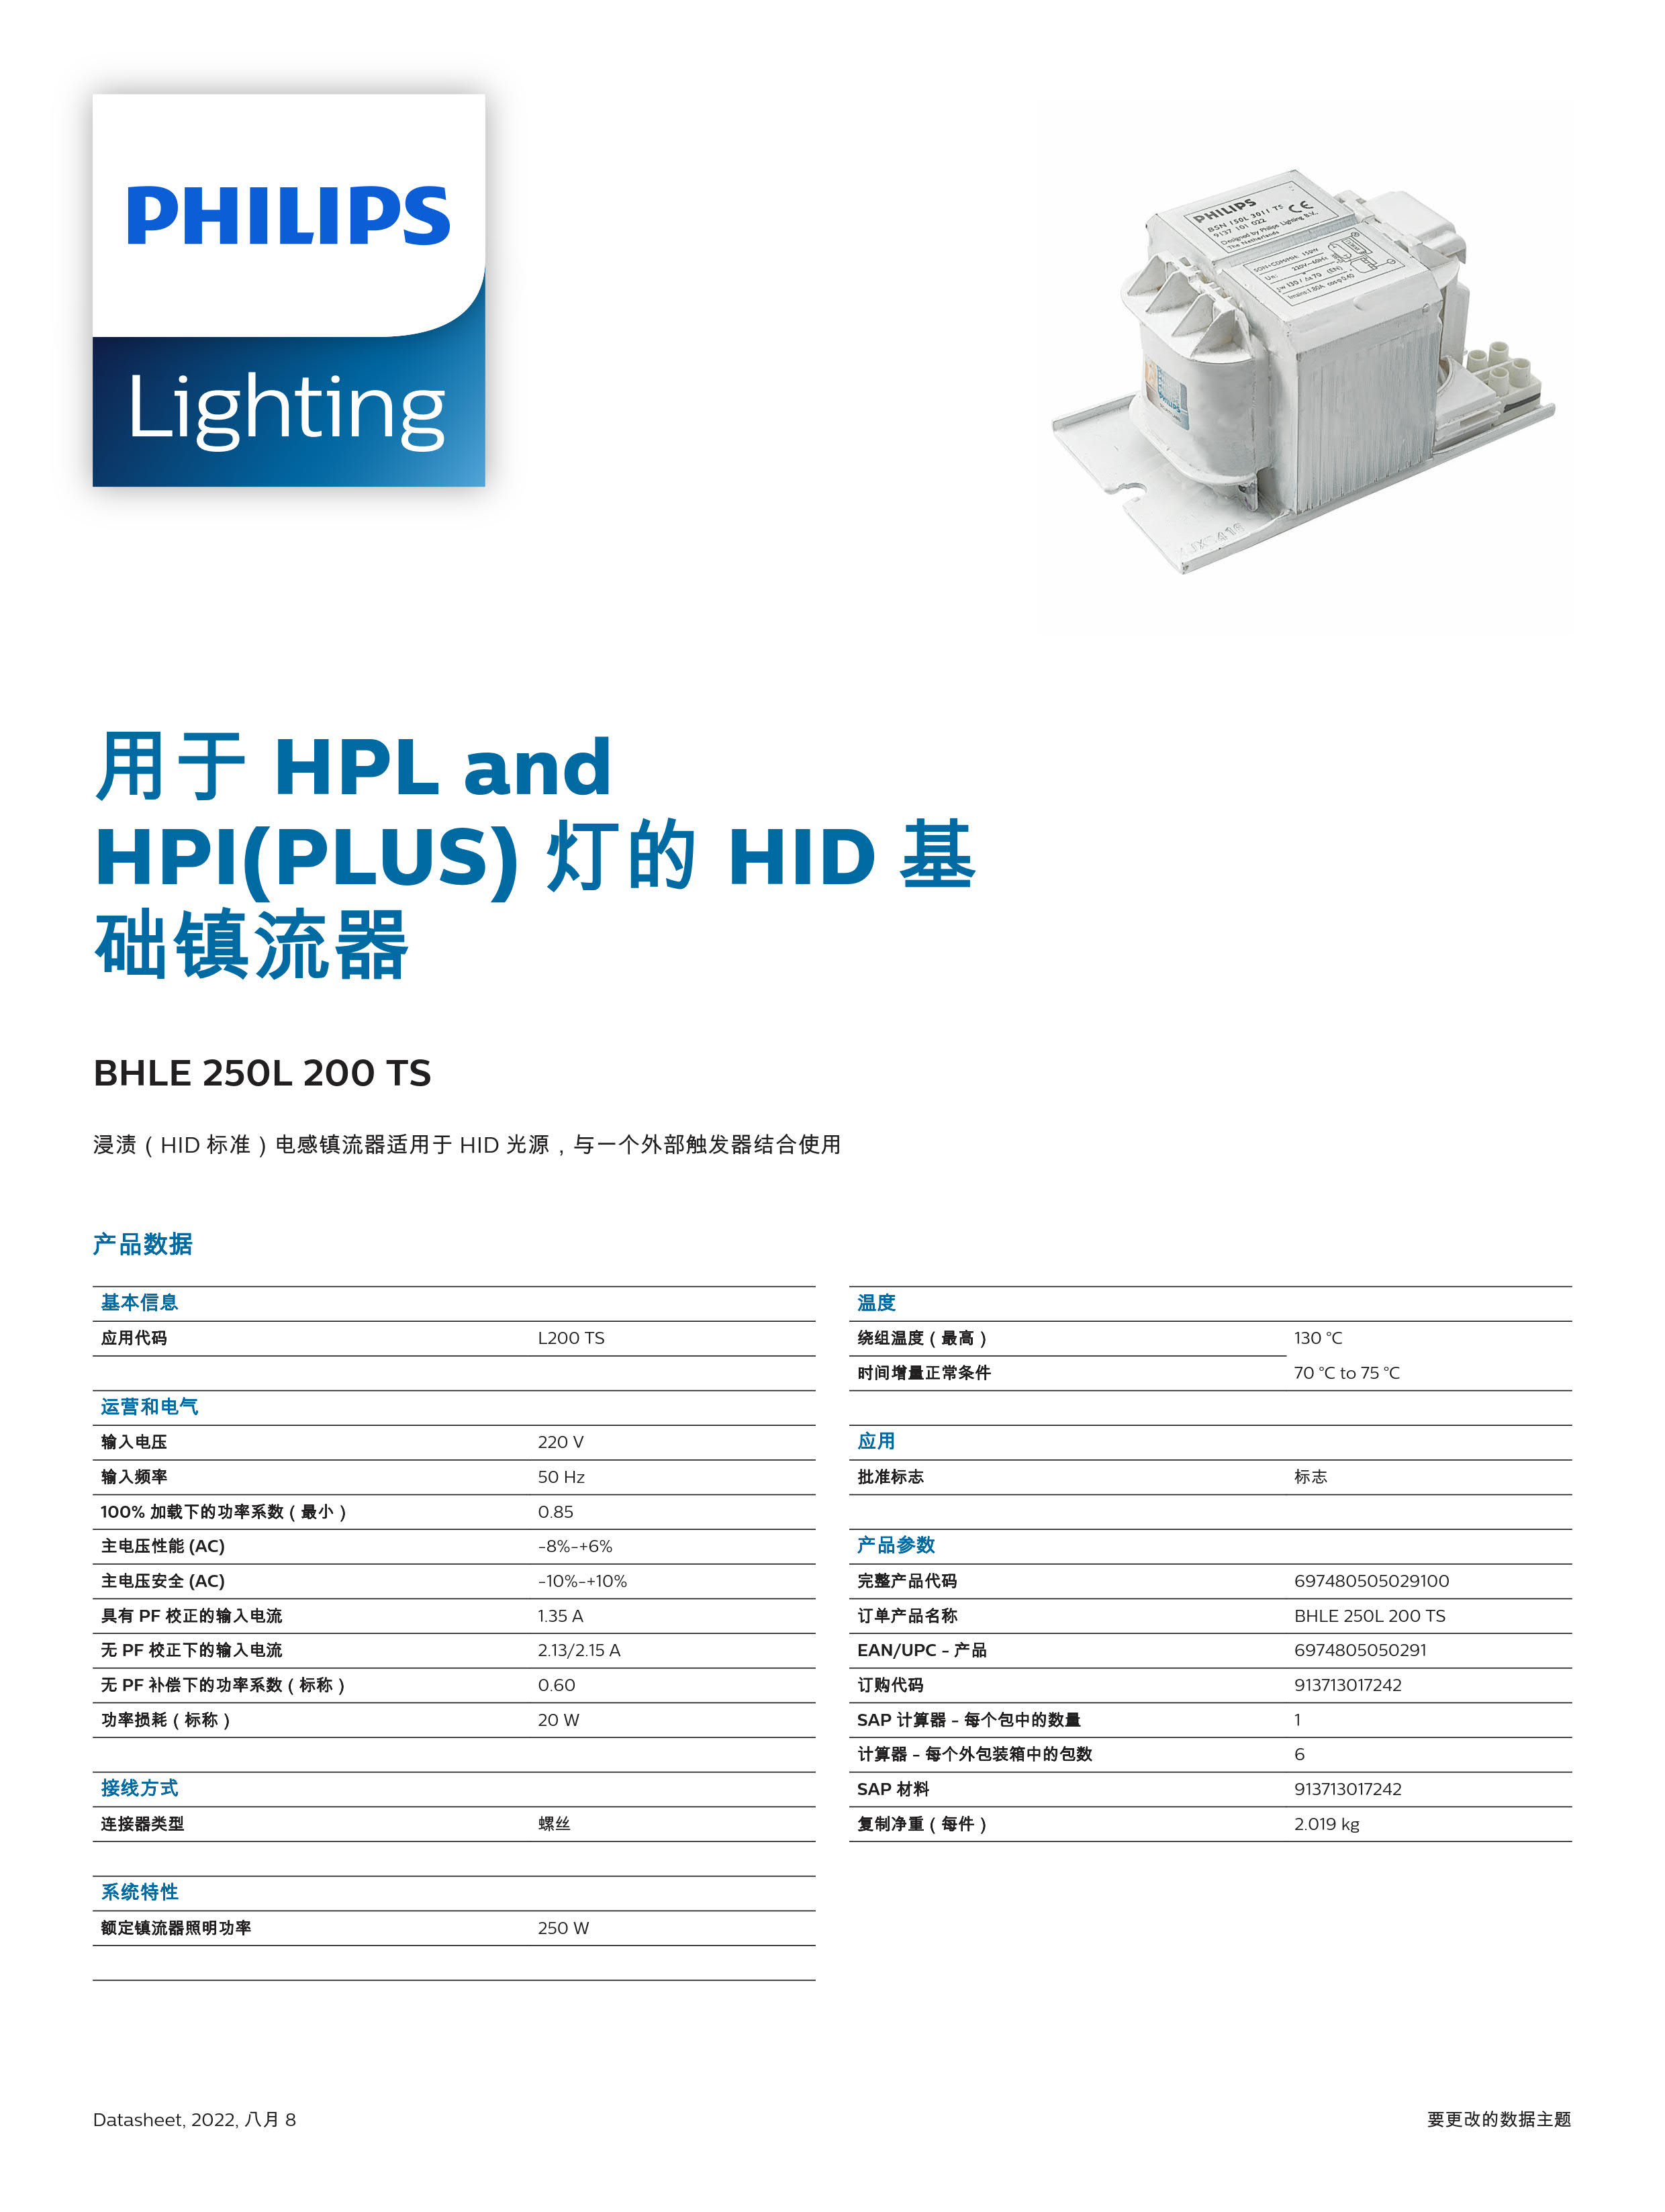 PHILIPS HID-Basic Ballasts for HPL and HPI(PLUS) Lamps BHLE 250L 200 TS 913713017242